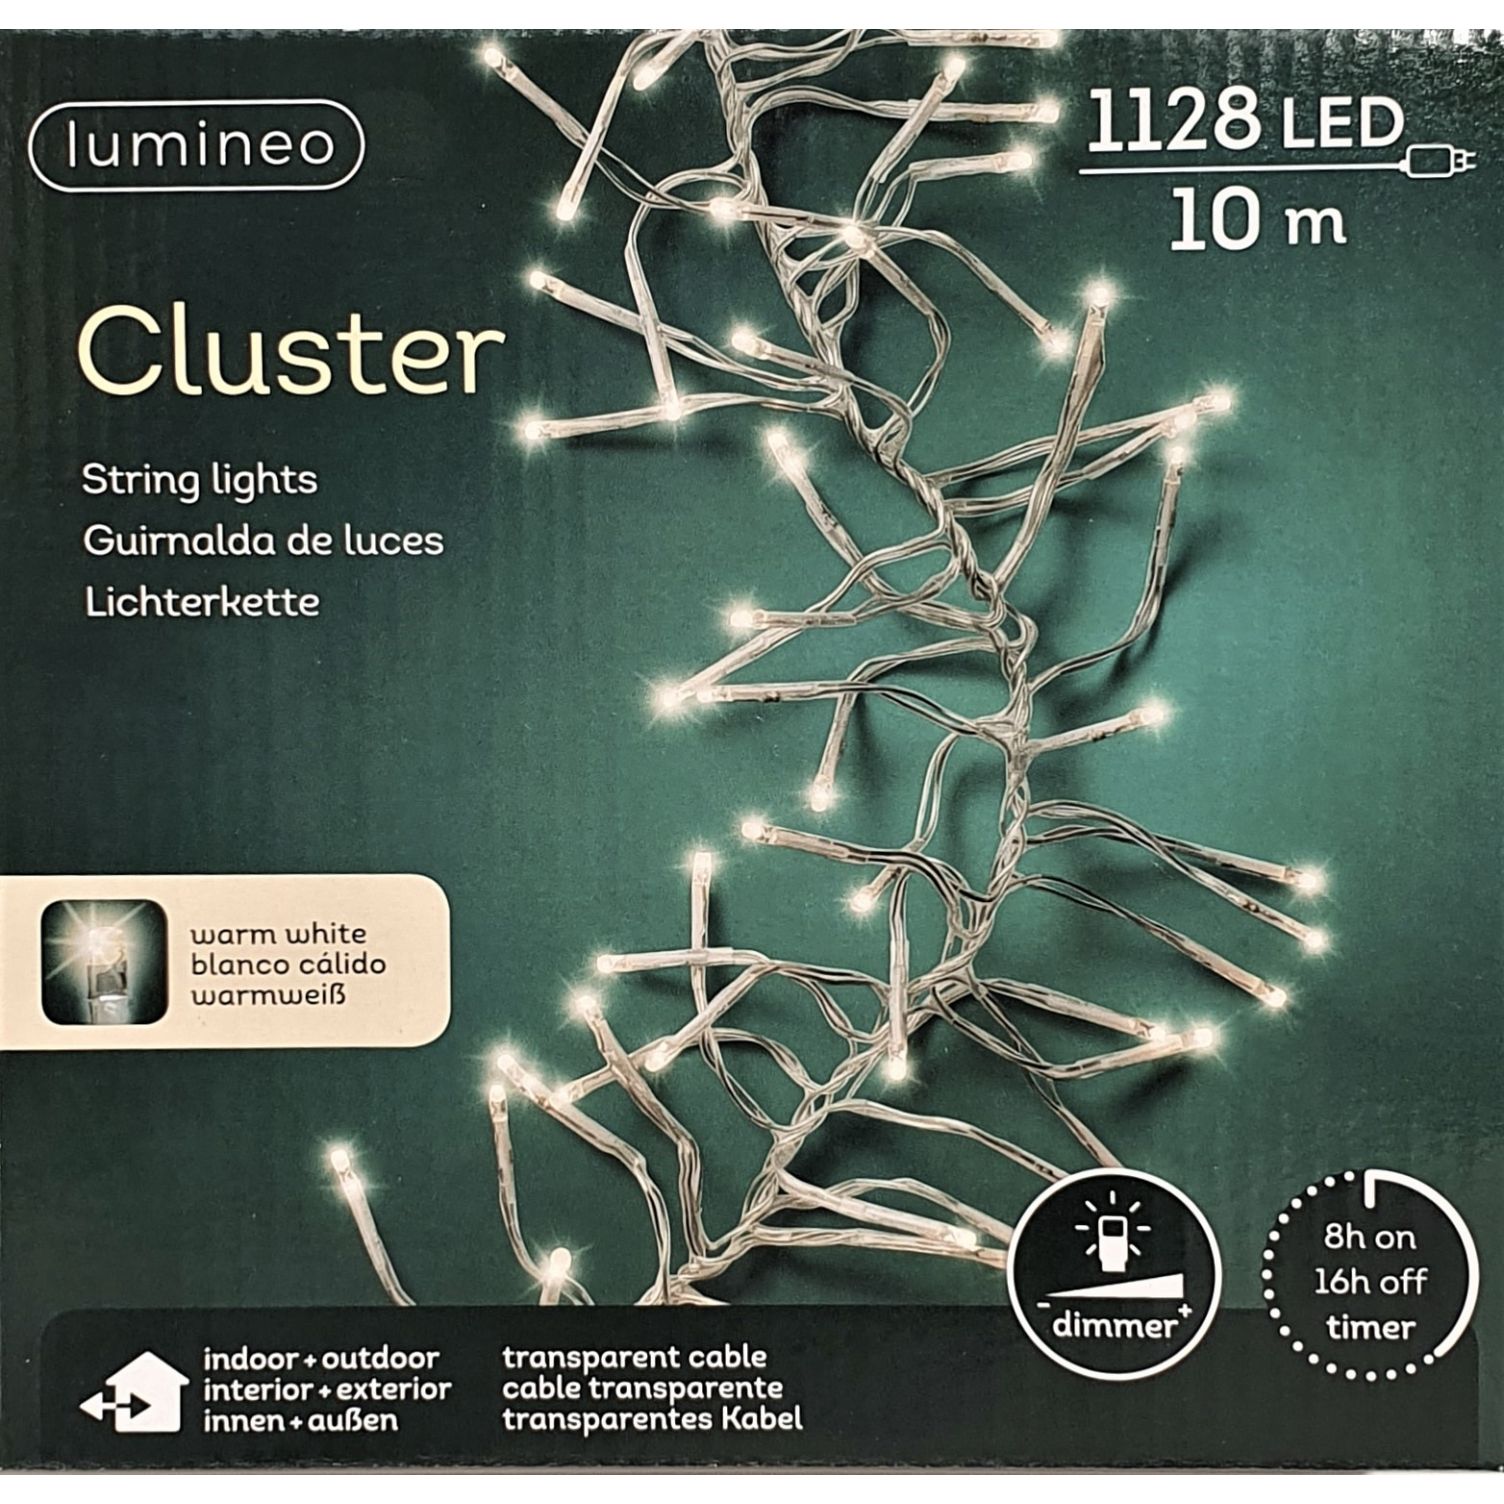 Clusterverlichting lumineo 1128-lamps LED 'warm wit ' transparante snoer